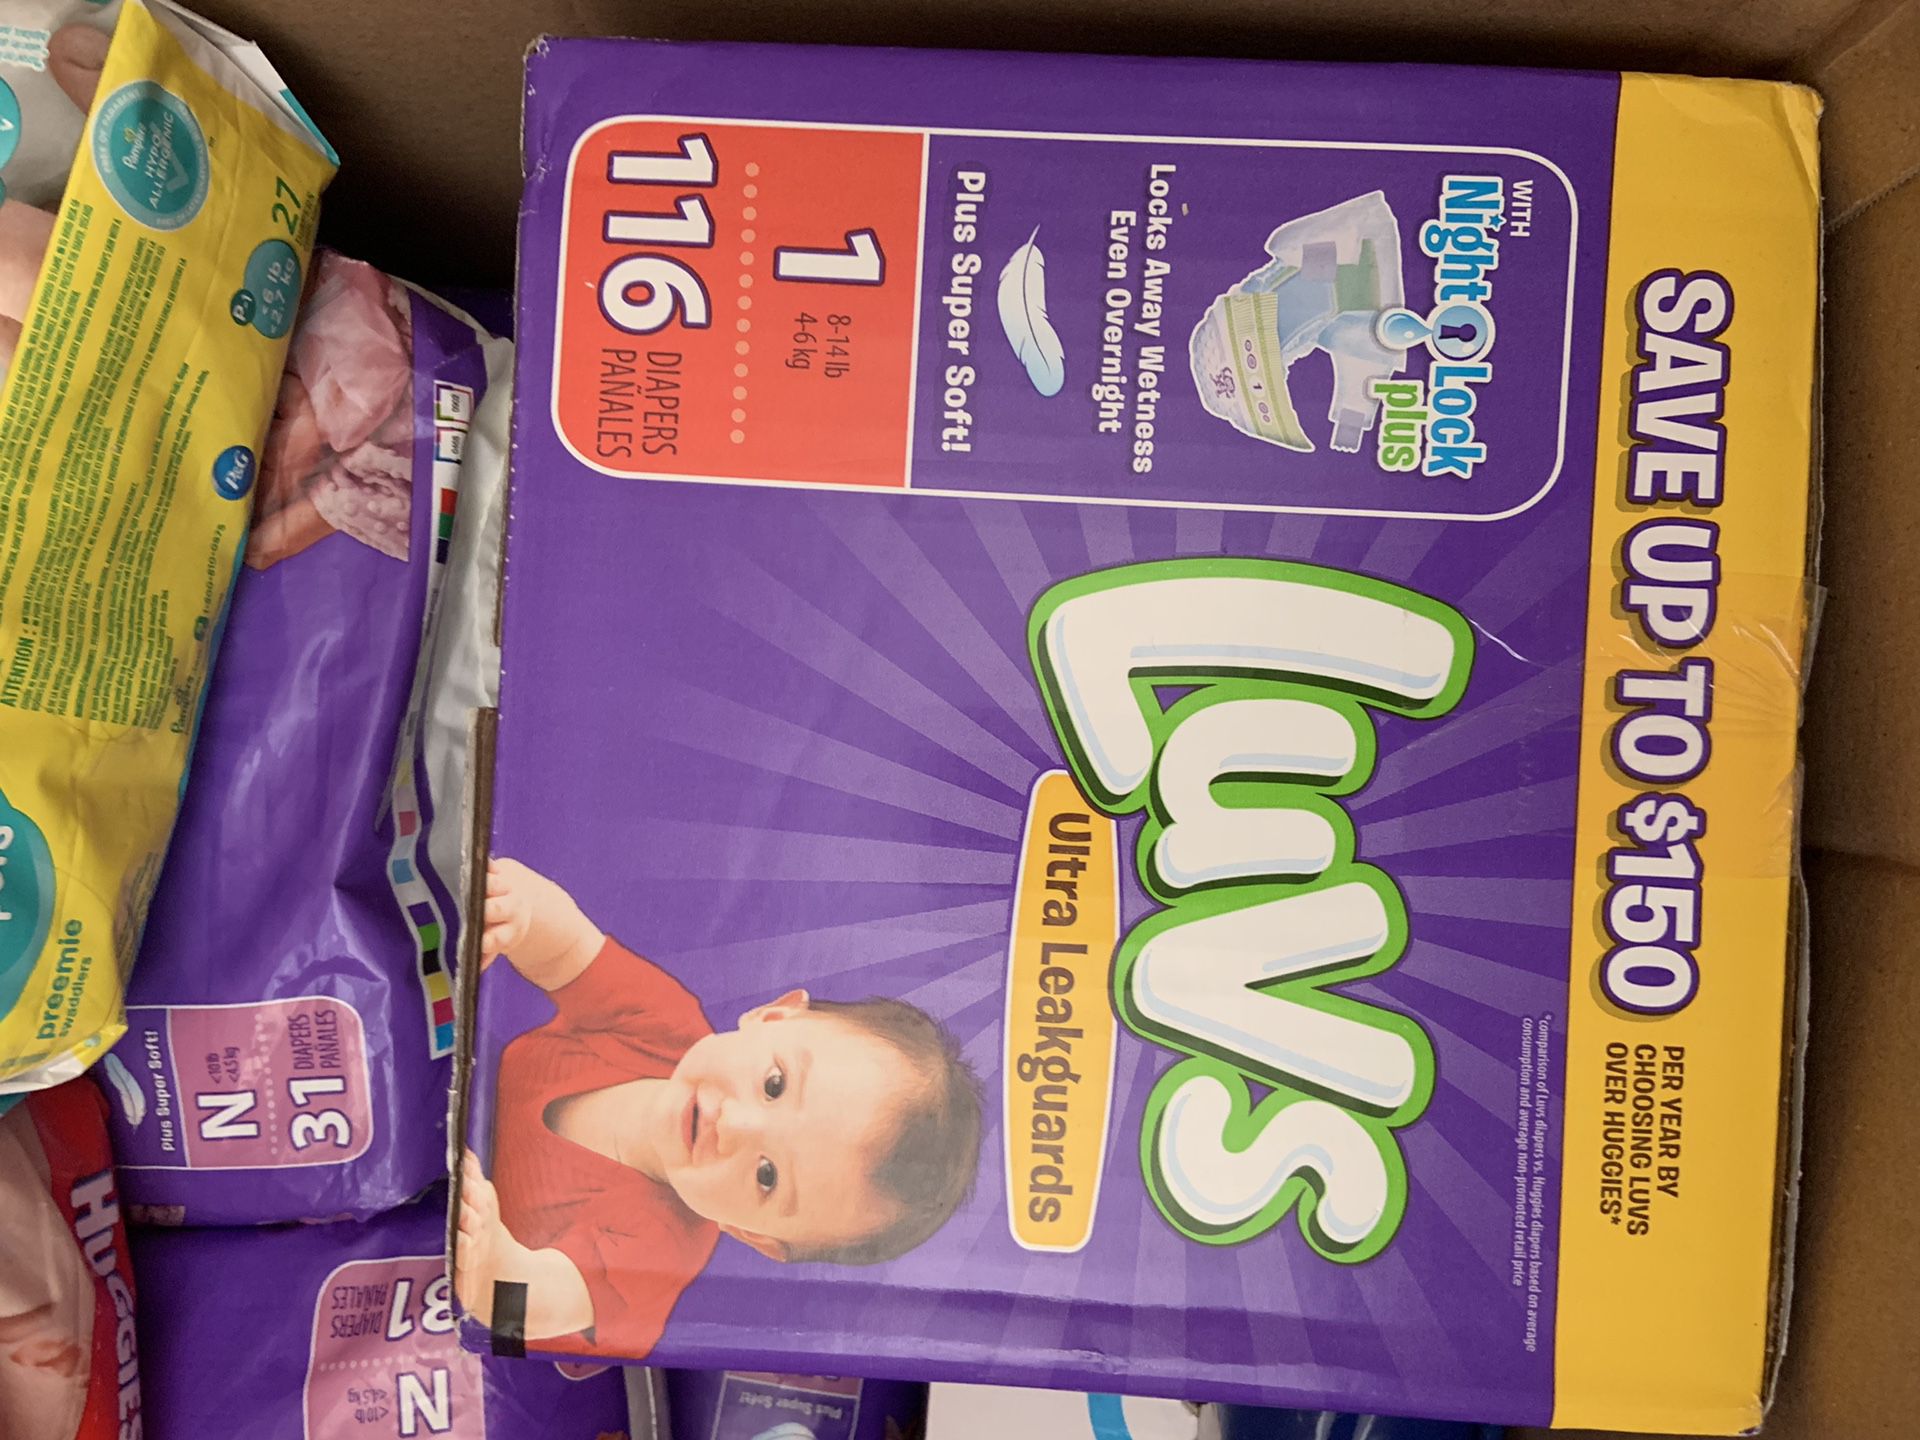 Diapers size 1